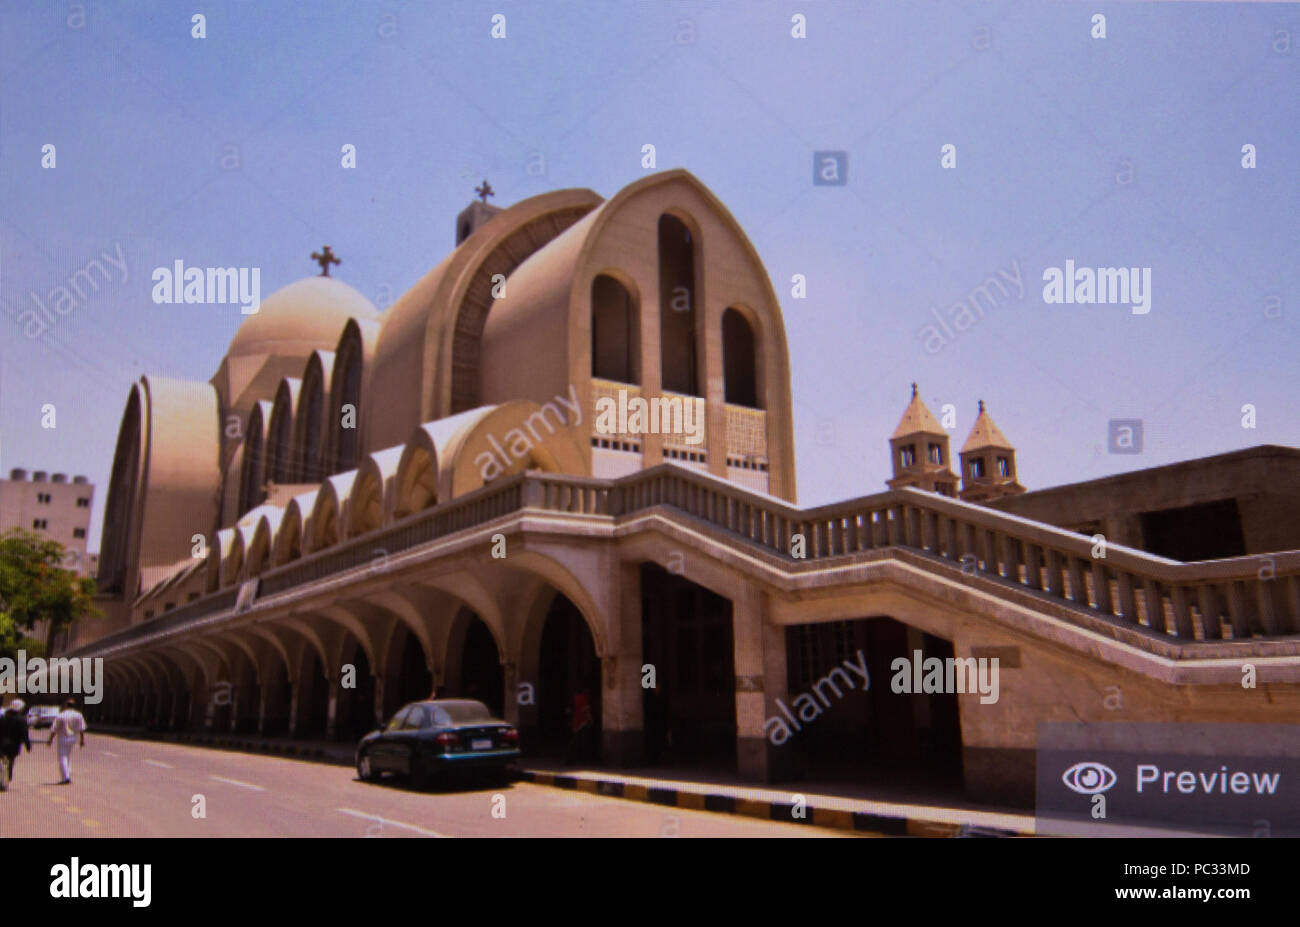 Alamy preview of Coptic church in Cairo Egypt Stock Photo